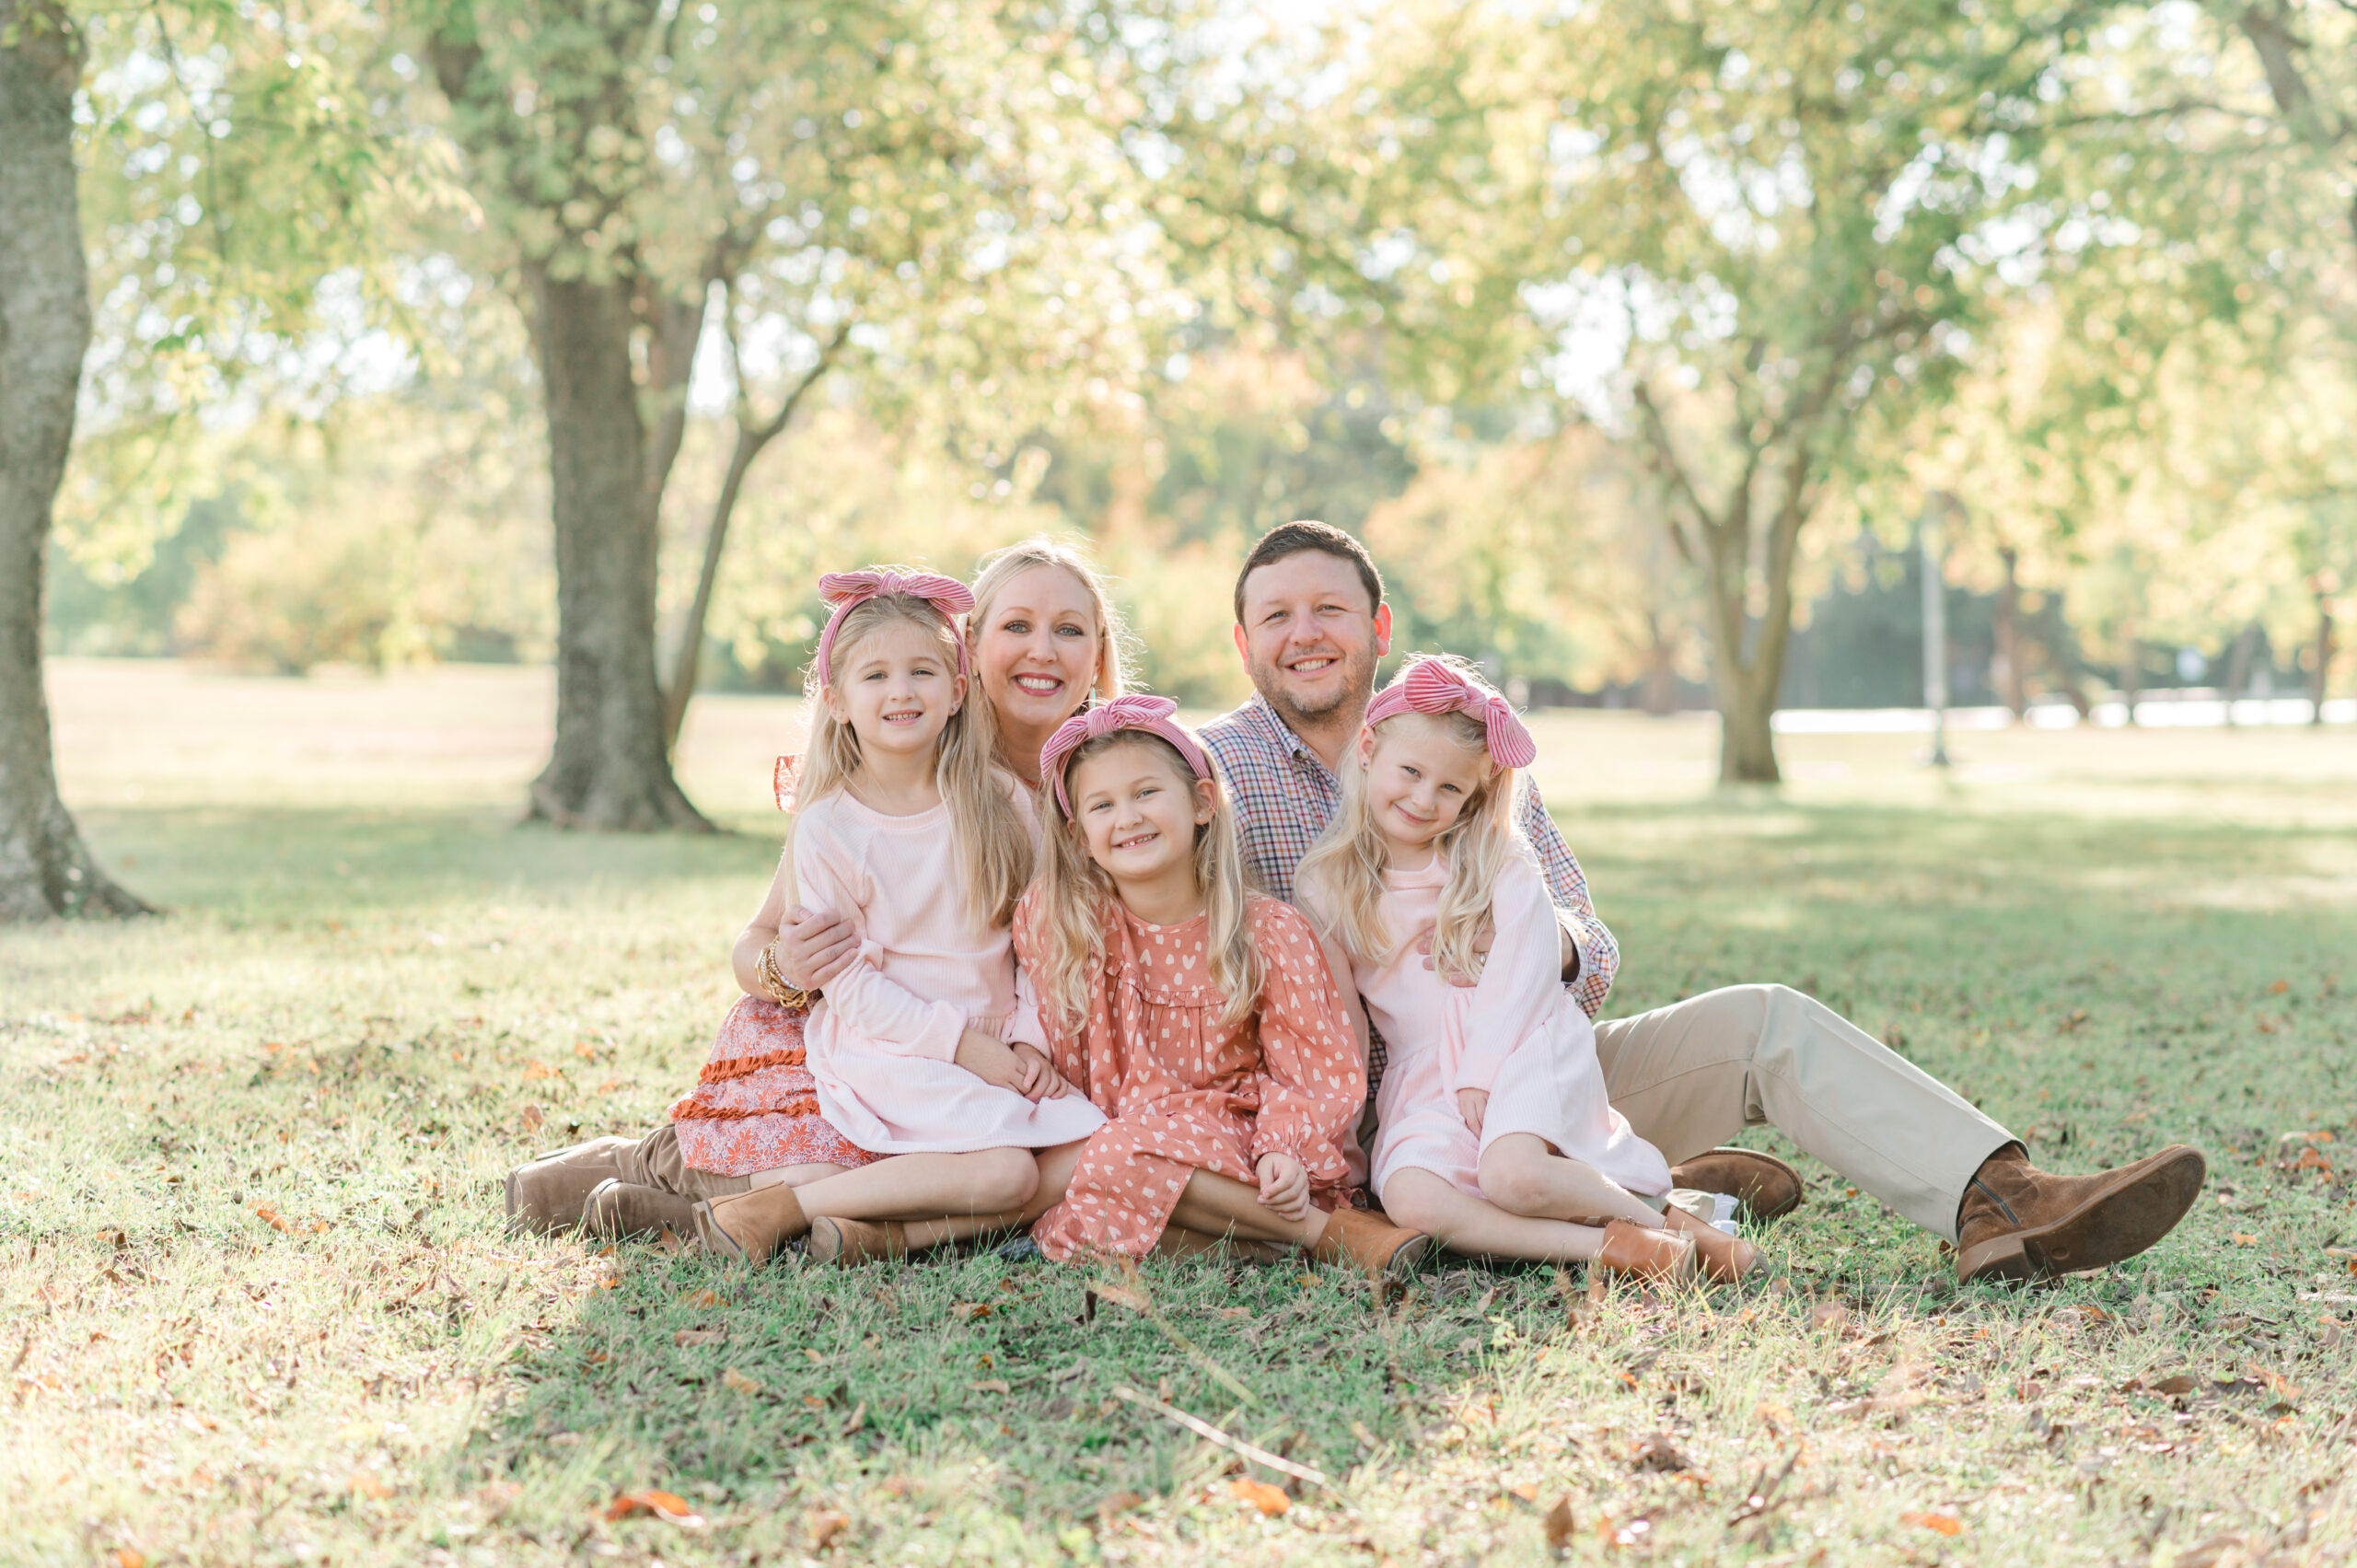 Family portrait by a pro photographer with a mom and dad and three daughters sitting on the grass in a park on a fall day.